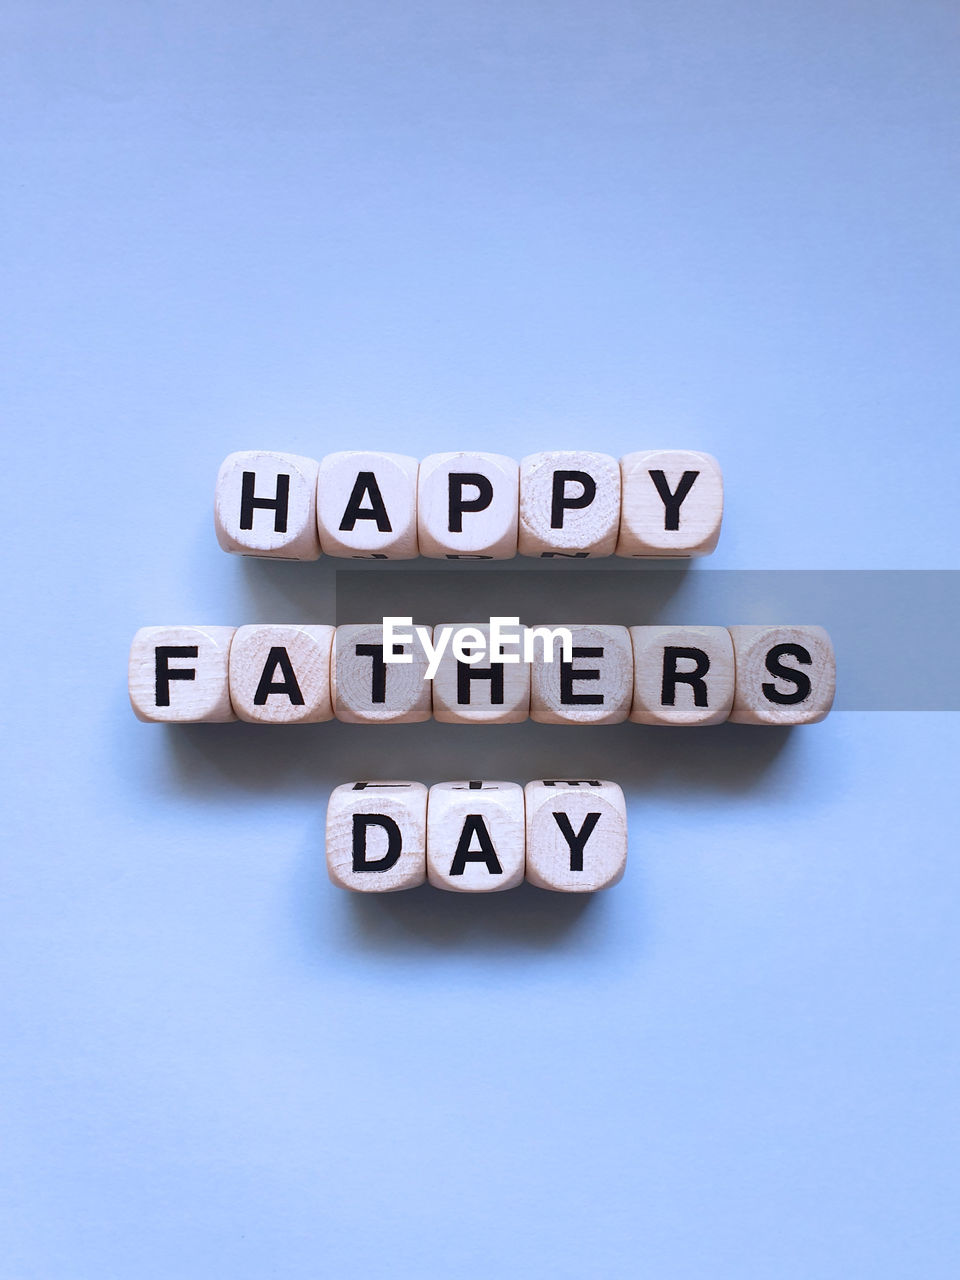 Happy fathers day, text against  blue background